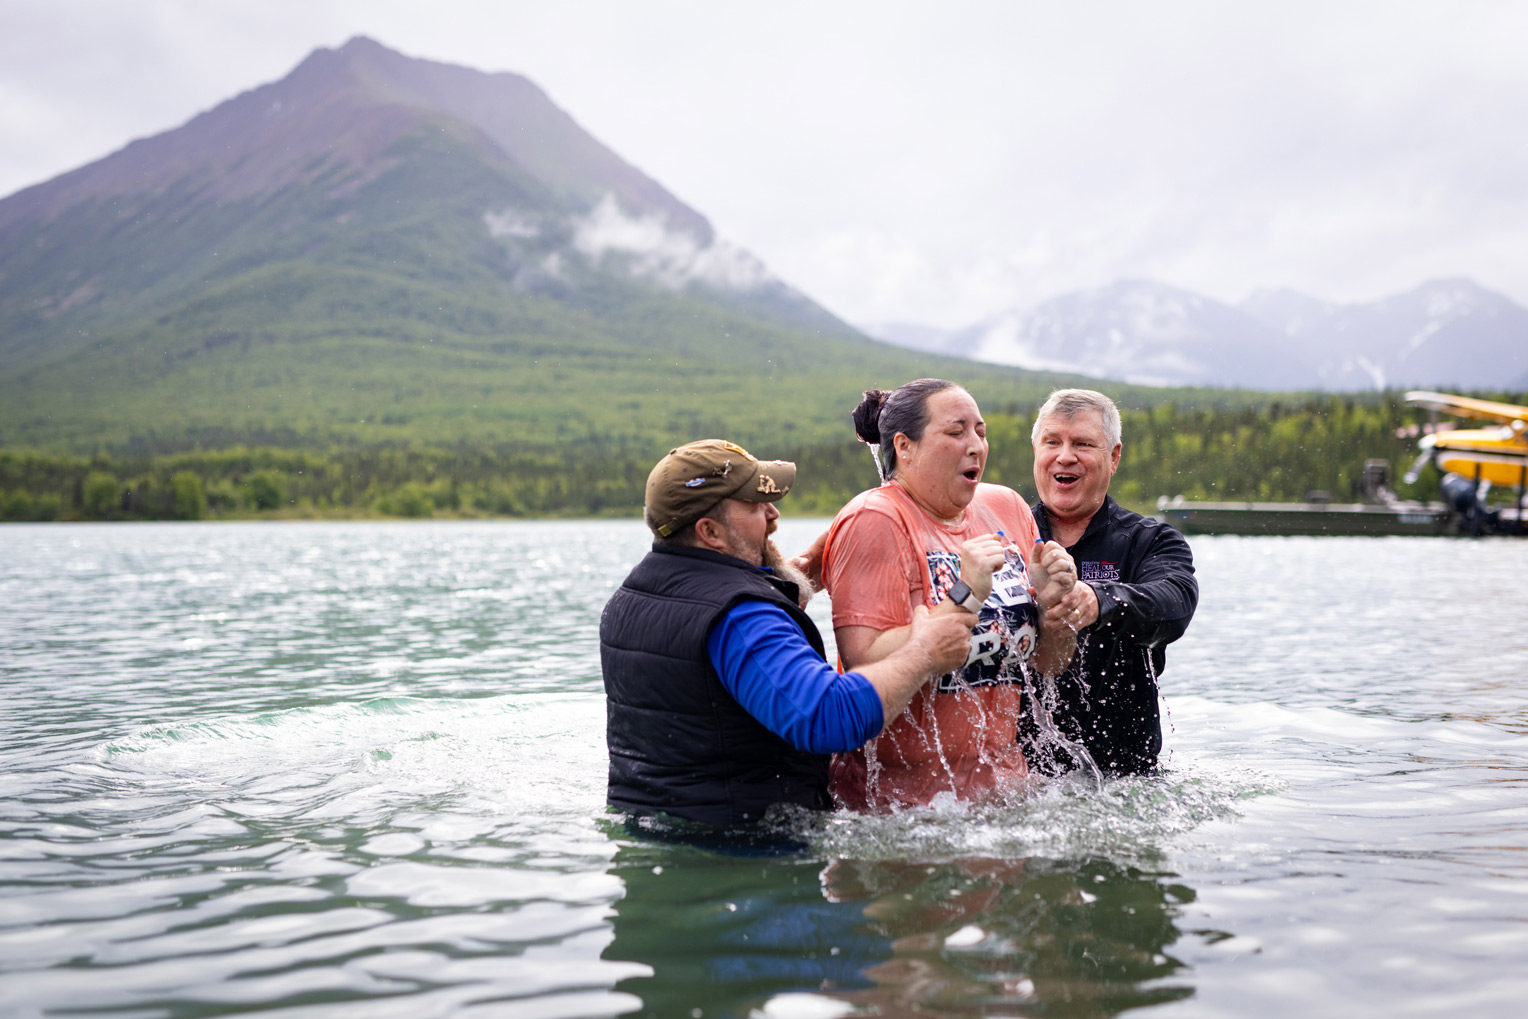 Navy Petty Officer Second Class Liz Wynne received Jesus Christ as Lord last week and was baptized in Lake Clark.